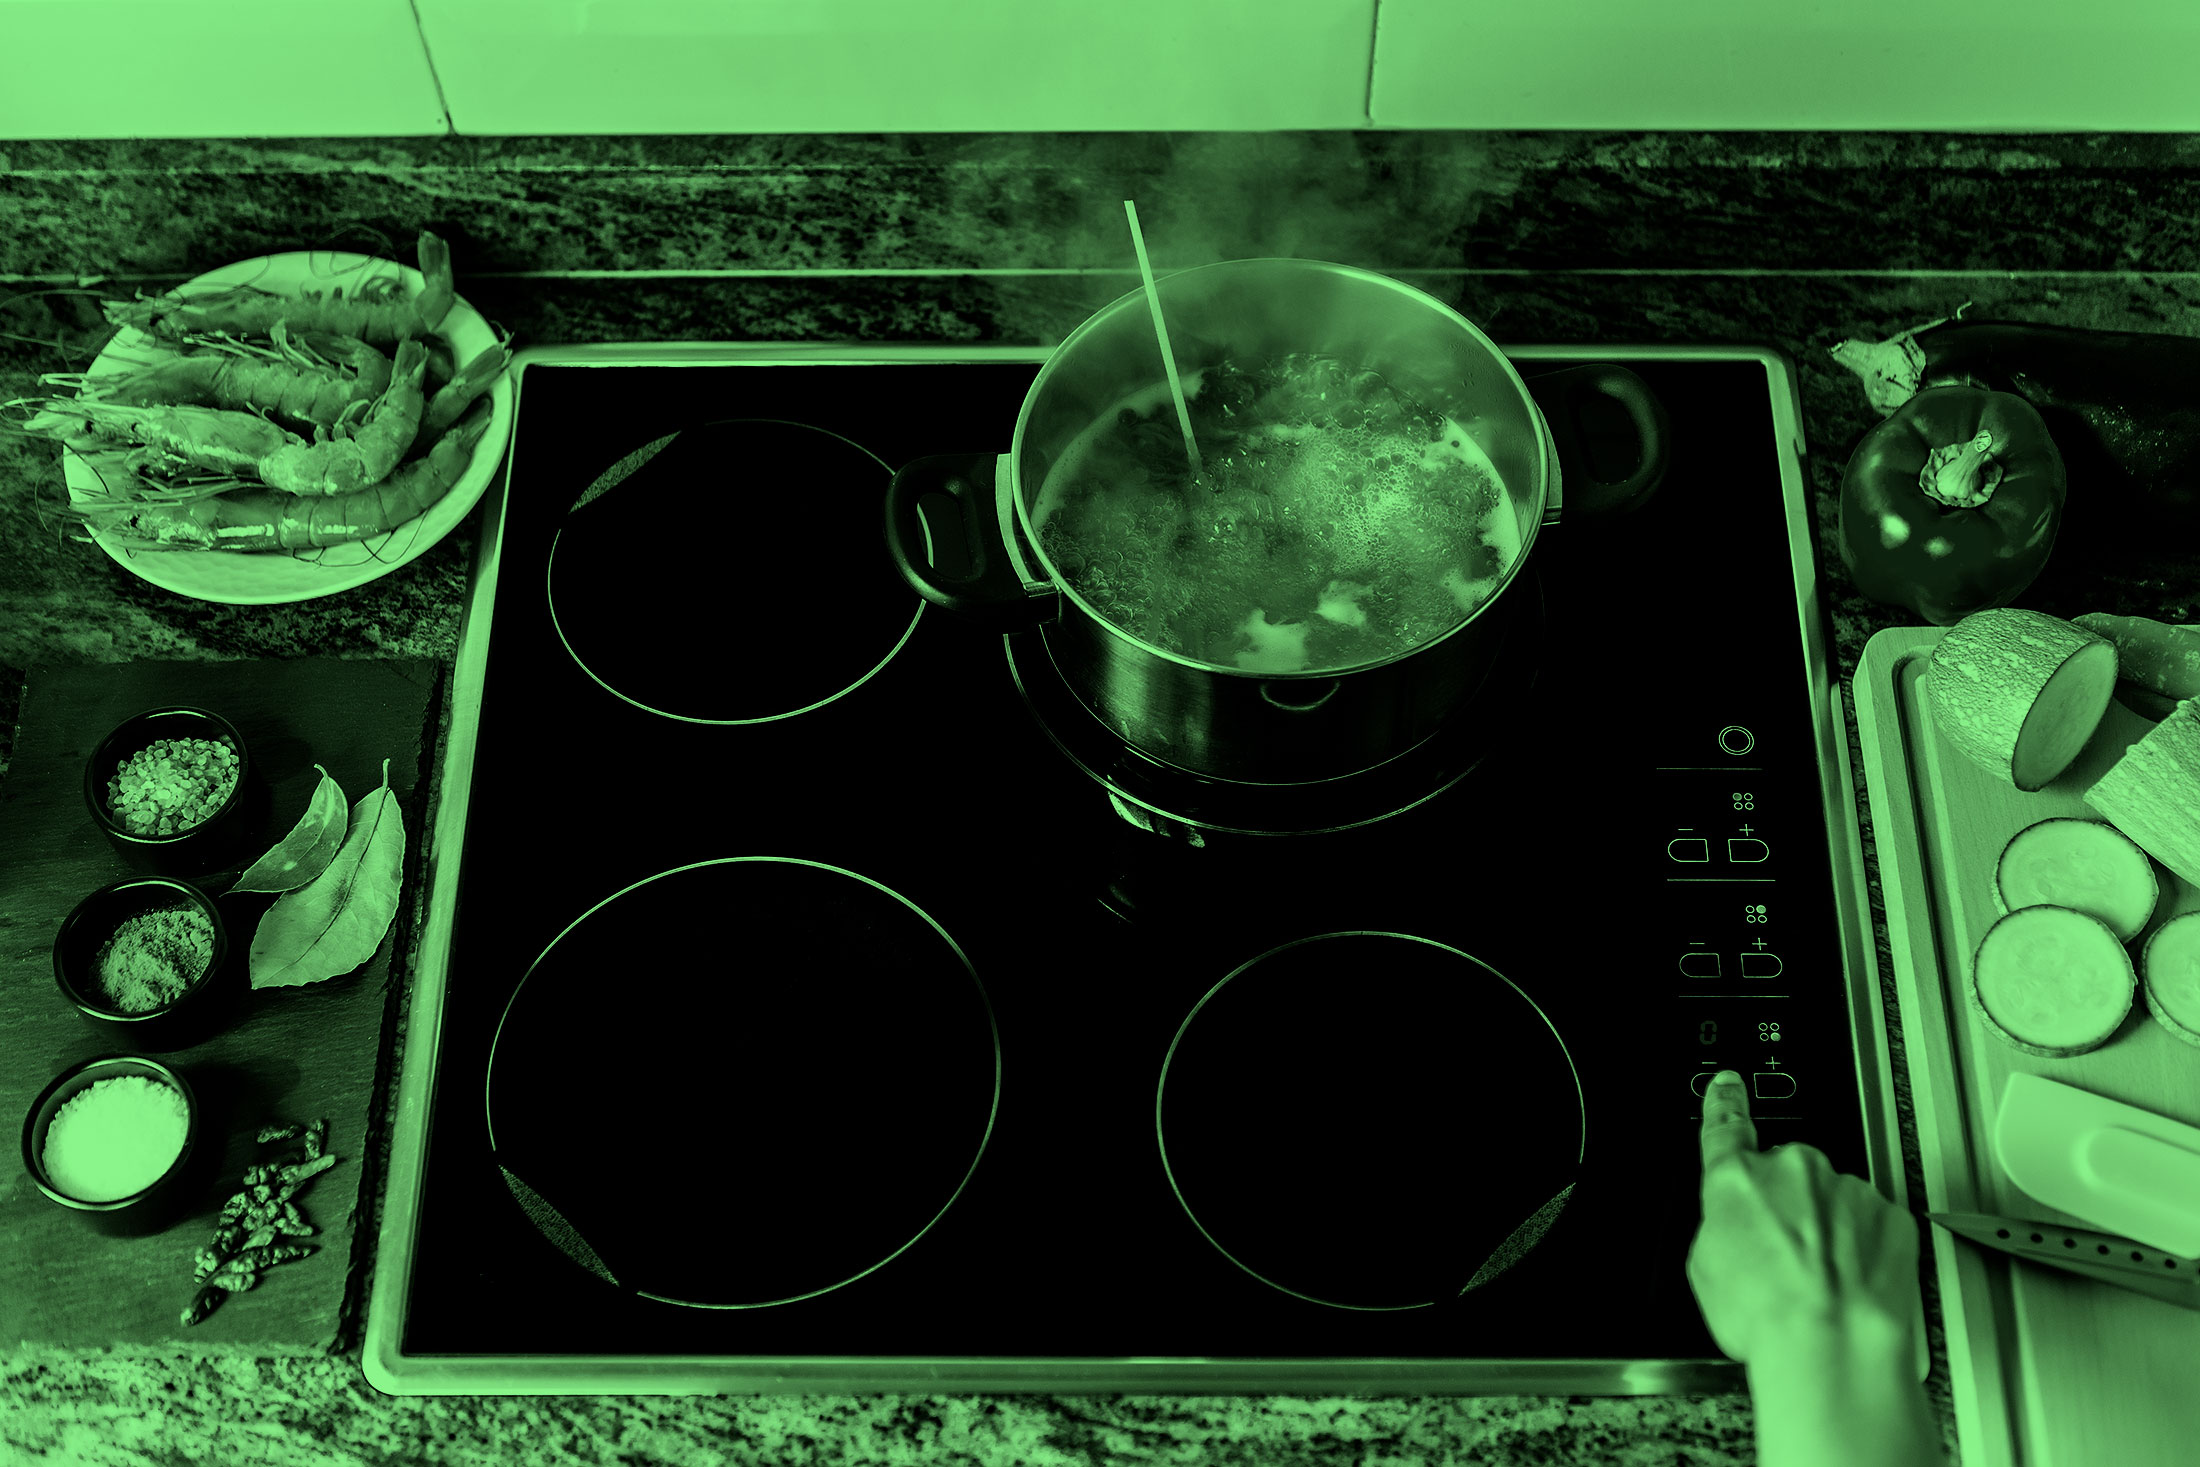 From above someone touching a button on induction cooktop while cooking dinner in modern home kitchen, on an induction stove